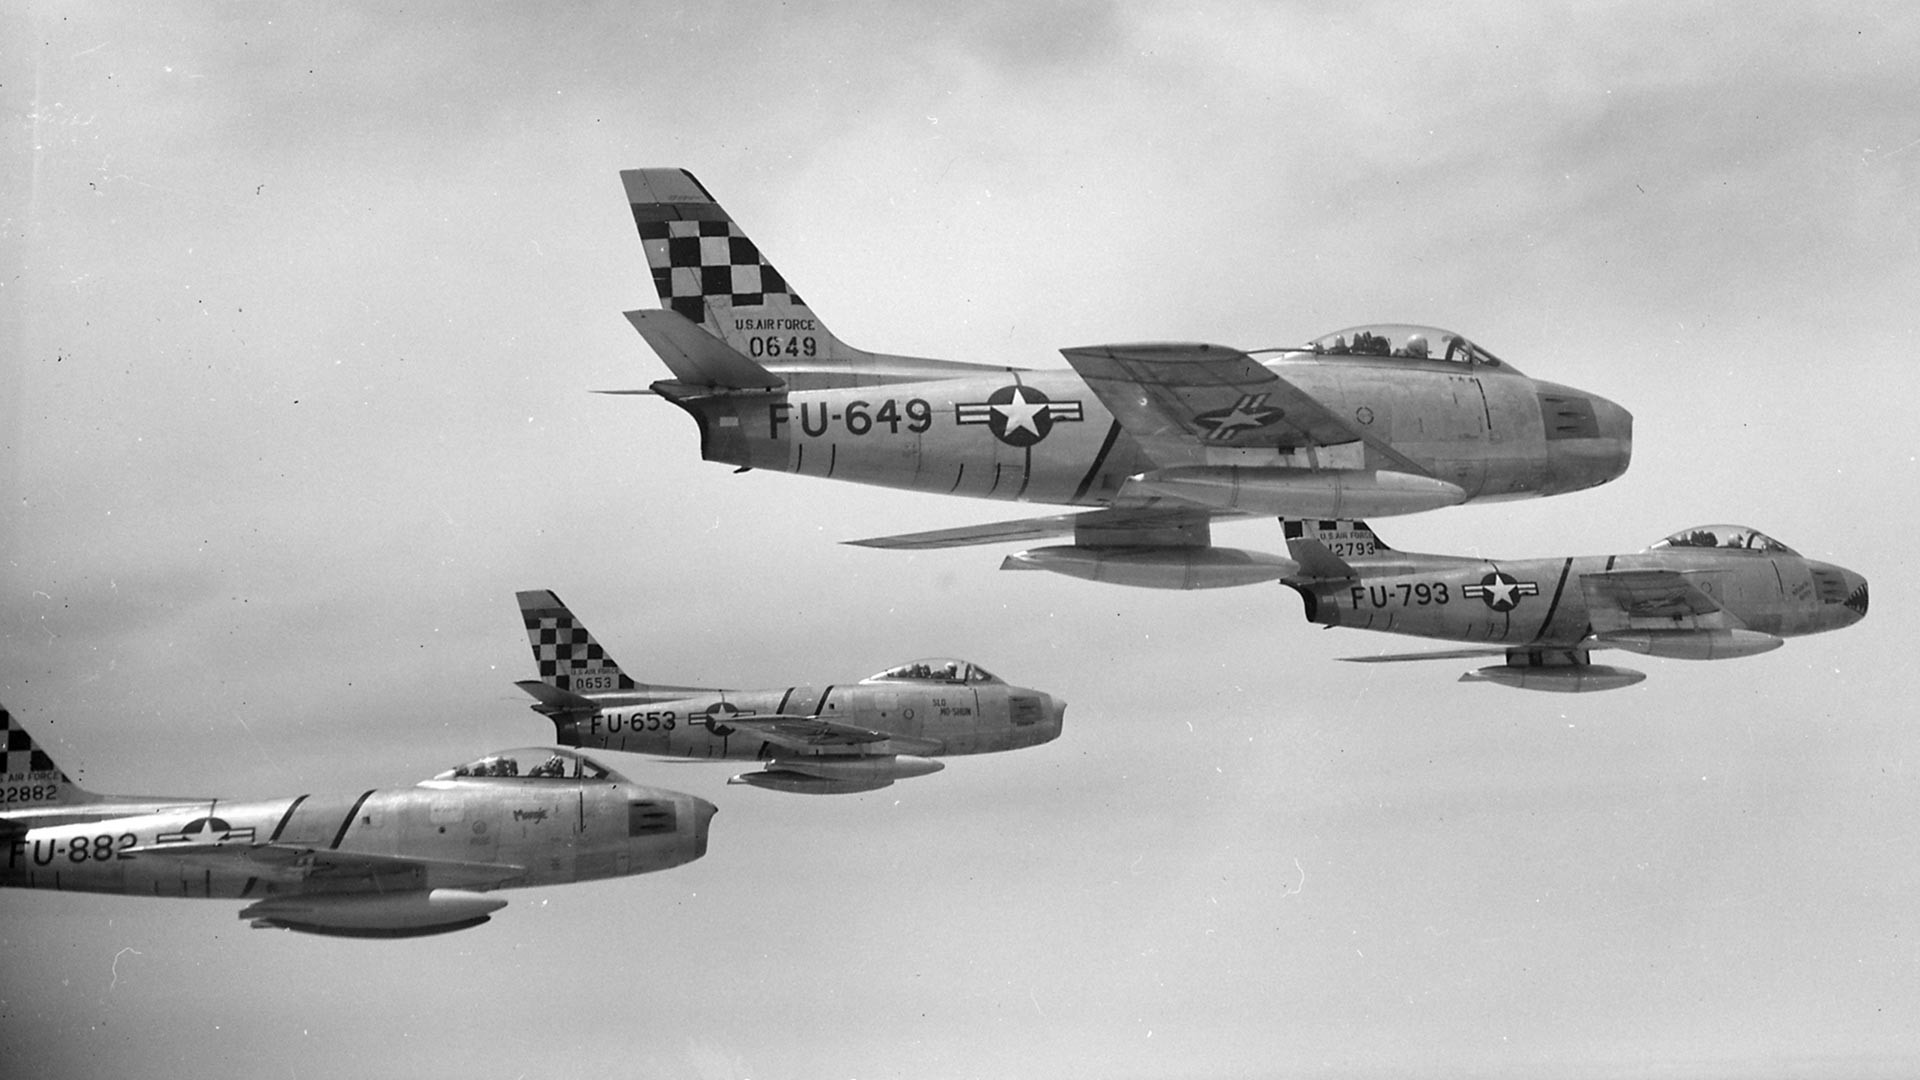 Four U.S. Air Force North American F-86E Sabre fighters of the 51st Fighter Interceptor Wing over Korea on 22 May 1953.